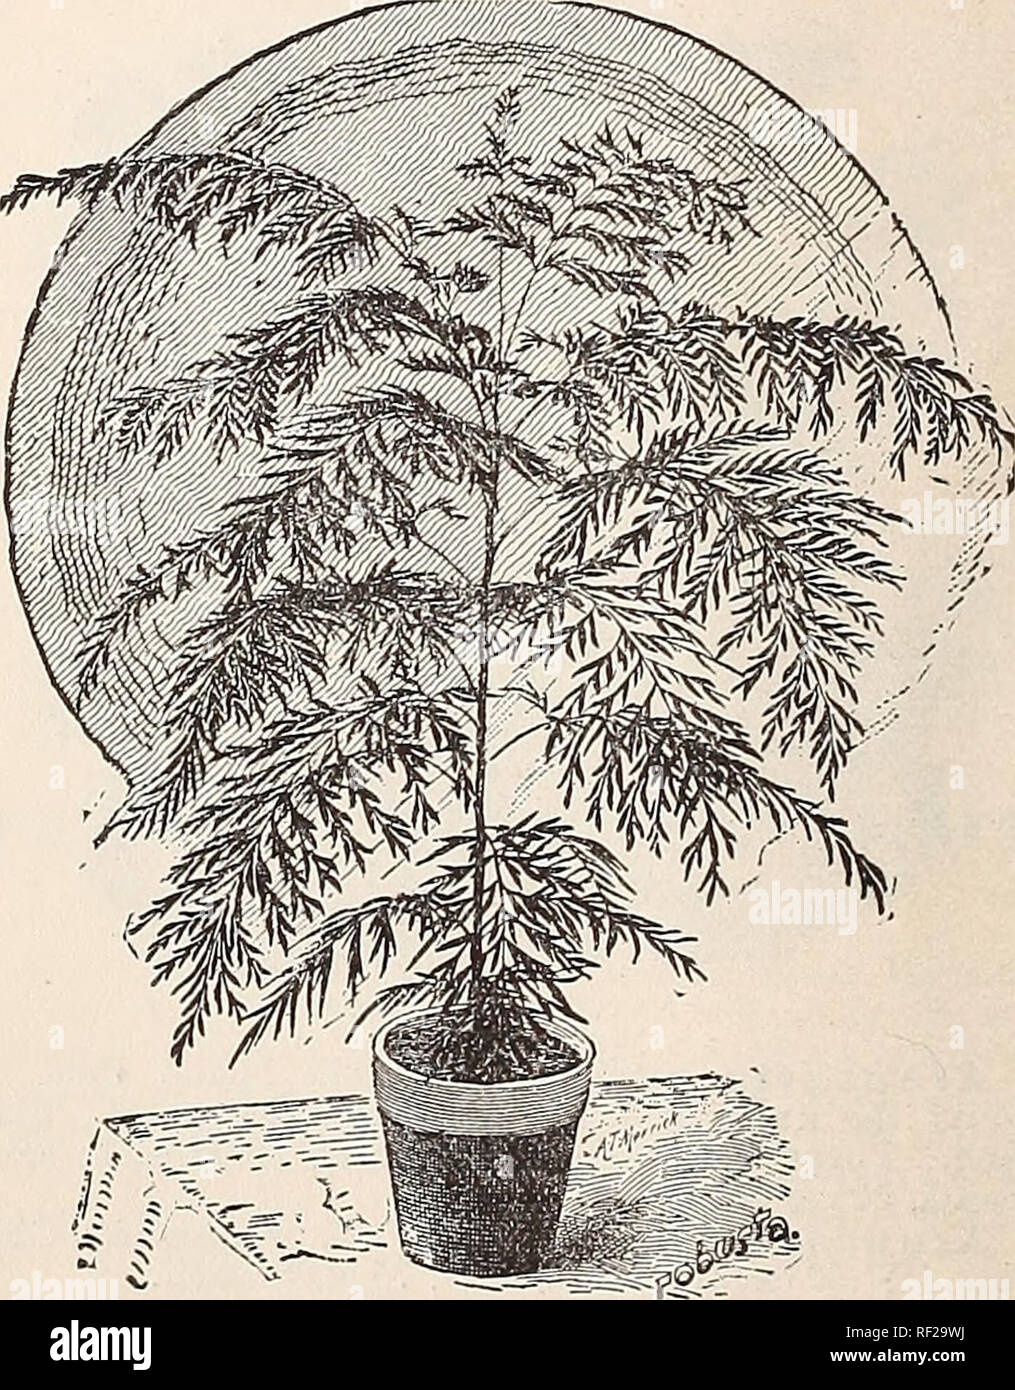 . Catalogue of the Cox Seed and Plant Co. Seed industry and trade Catalogs; Seeds Catalogs; Flowers Seeds Catalogs; Fruit Seeds Catalogs; Plants, Ornamental Catalogs; Trees Catalogs. Sword Fern. Sword Fern. A splendid extra hardy sort, well adapted for house culture, succeeding with ordinary care, with everyone who tries it. The fronds are often 4 feet long. Fine basket plant, throwing out runners which soon make new plants. 30 cents.. Grevillea Robusta. Grevillea Robusta. (Australian Silk Oak ) A splendid fern-leafed, evergreen plant, which makes a. Please note that these images are extracted Stock Photo